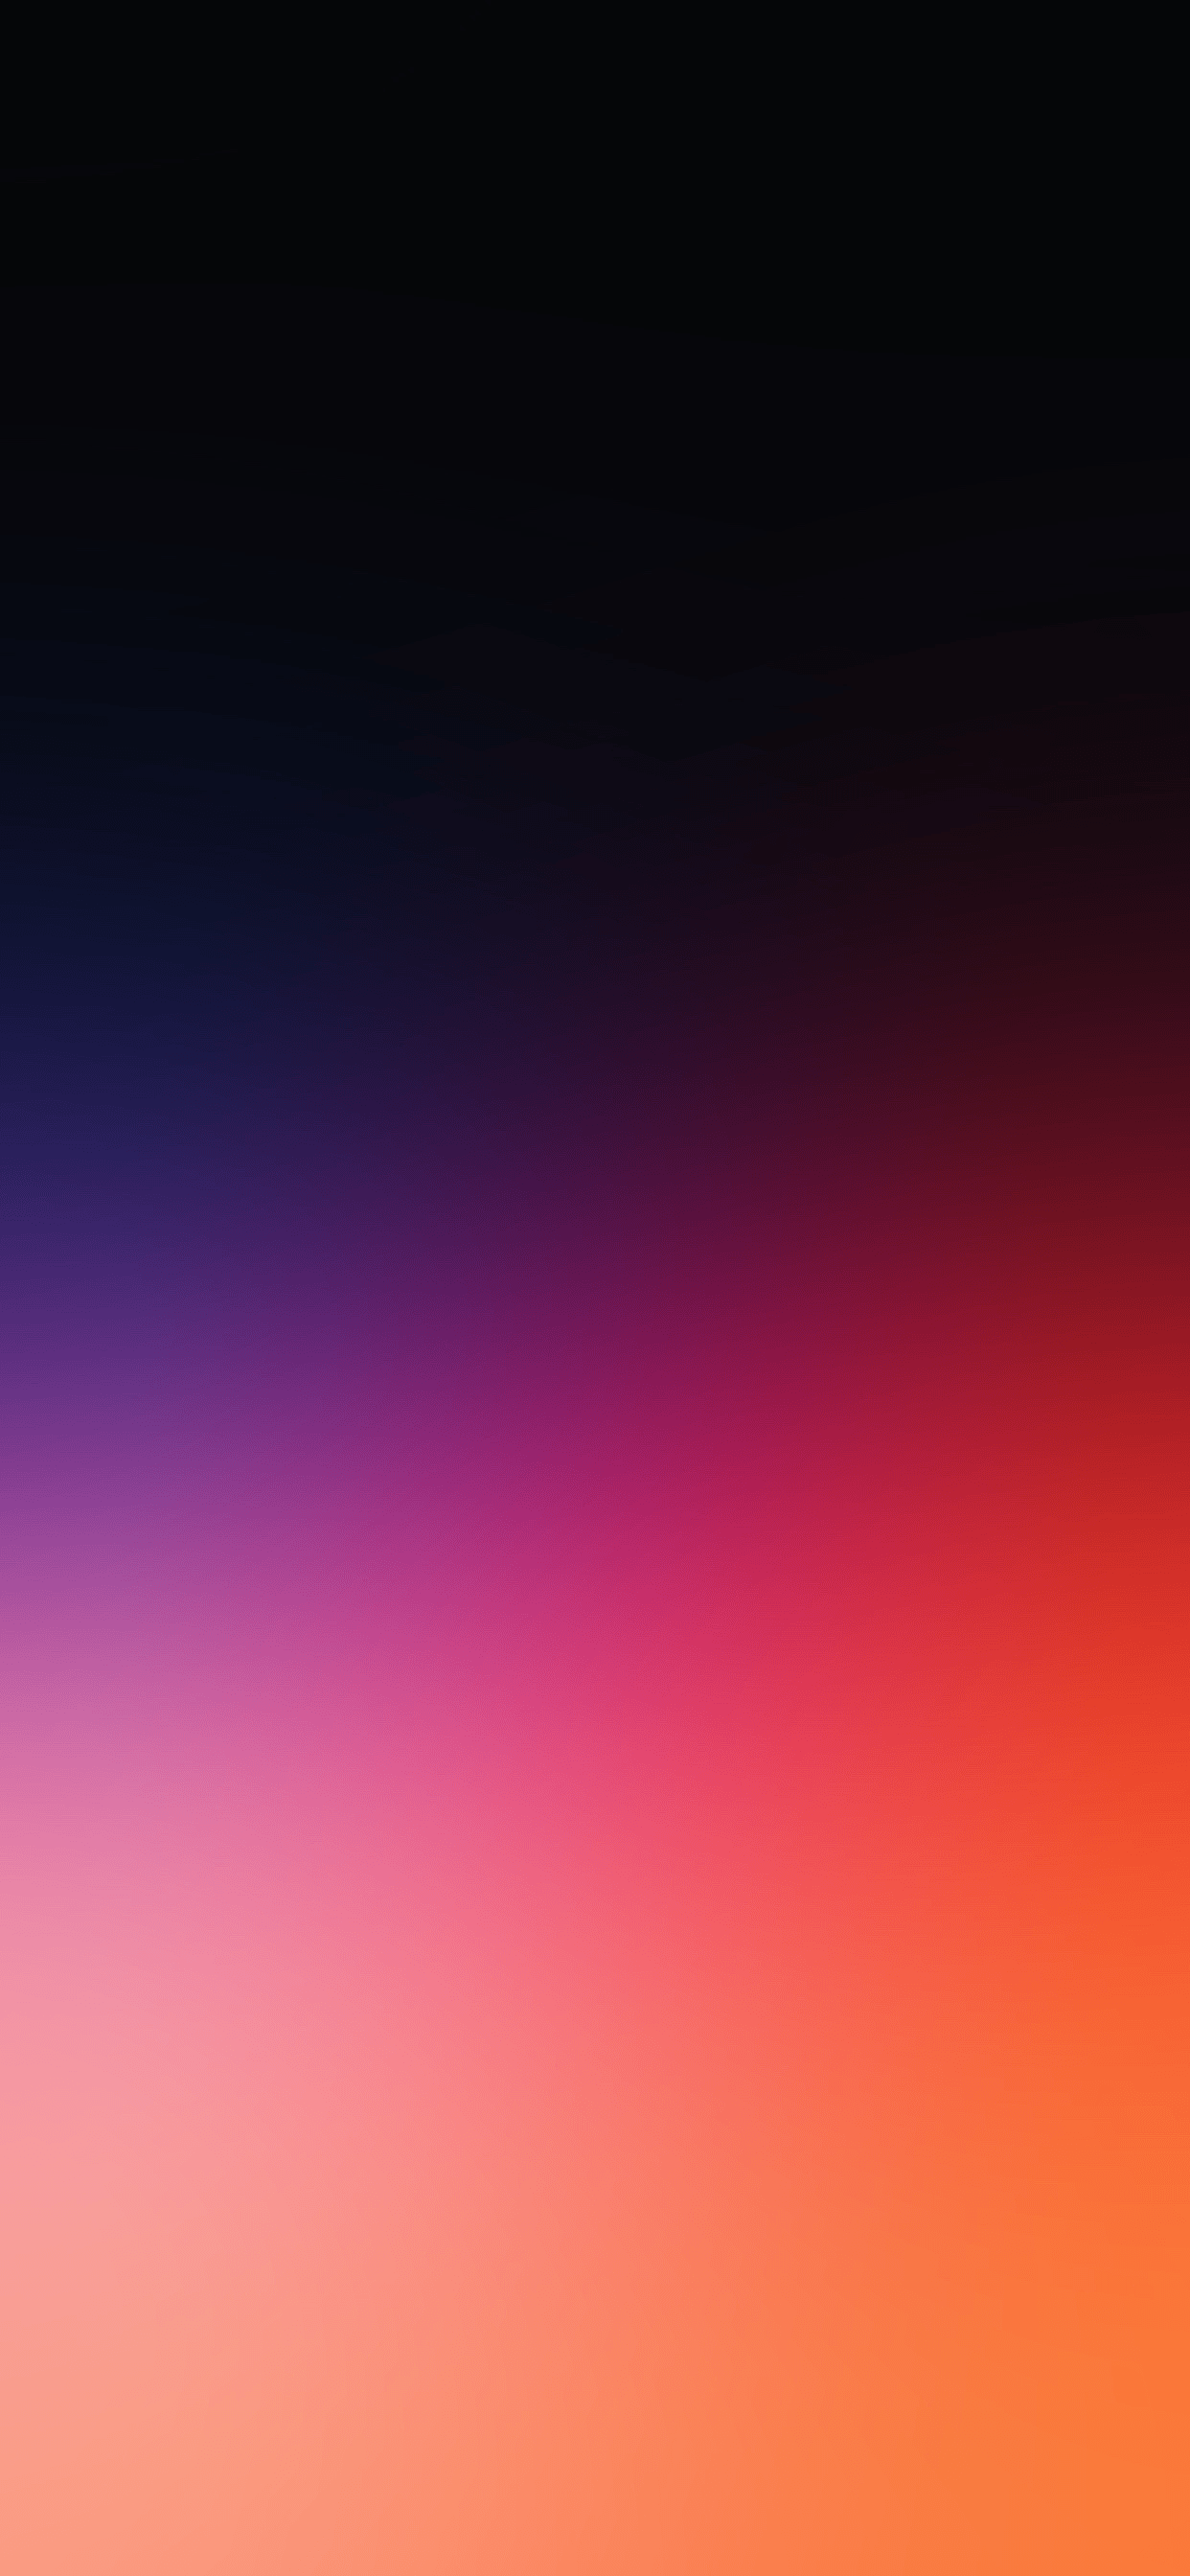 Download Gradient Wallpapers for iPhone 12 and 13 Pro